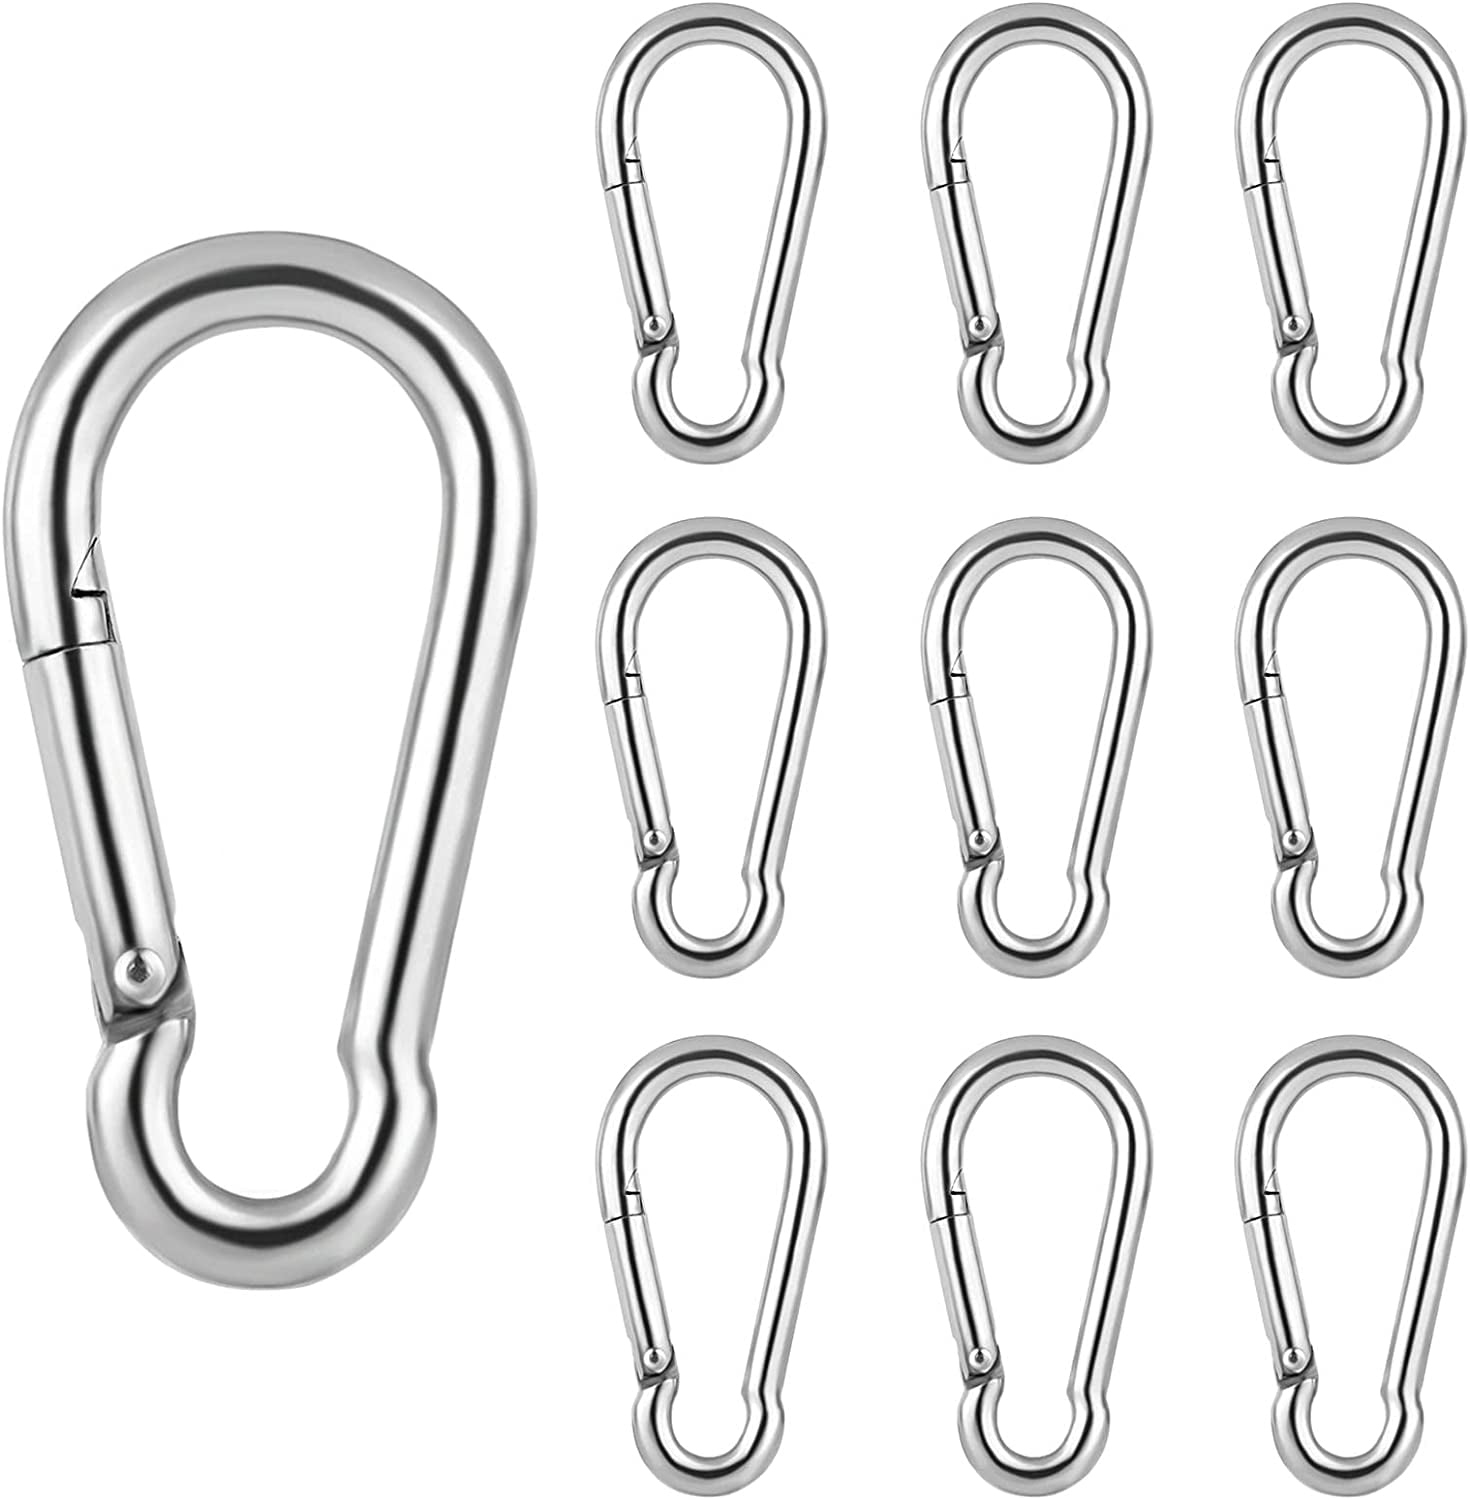 8-shaped Lock Hook Metal Buckle Key Ring Carabiner Swivel Trigger Clip Snap  Buckles Creative Small Outdoor Quick Hanging Buckle